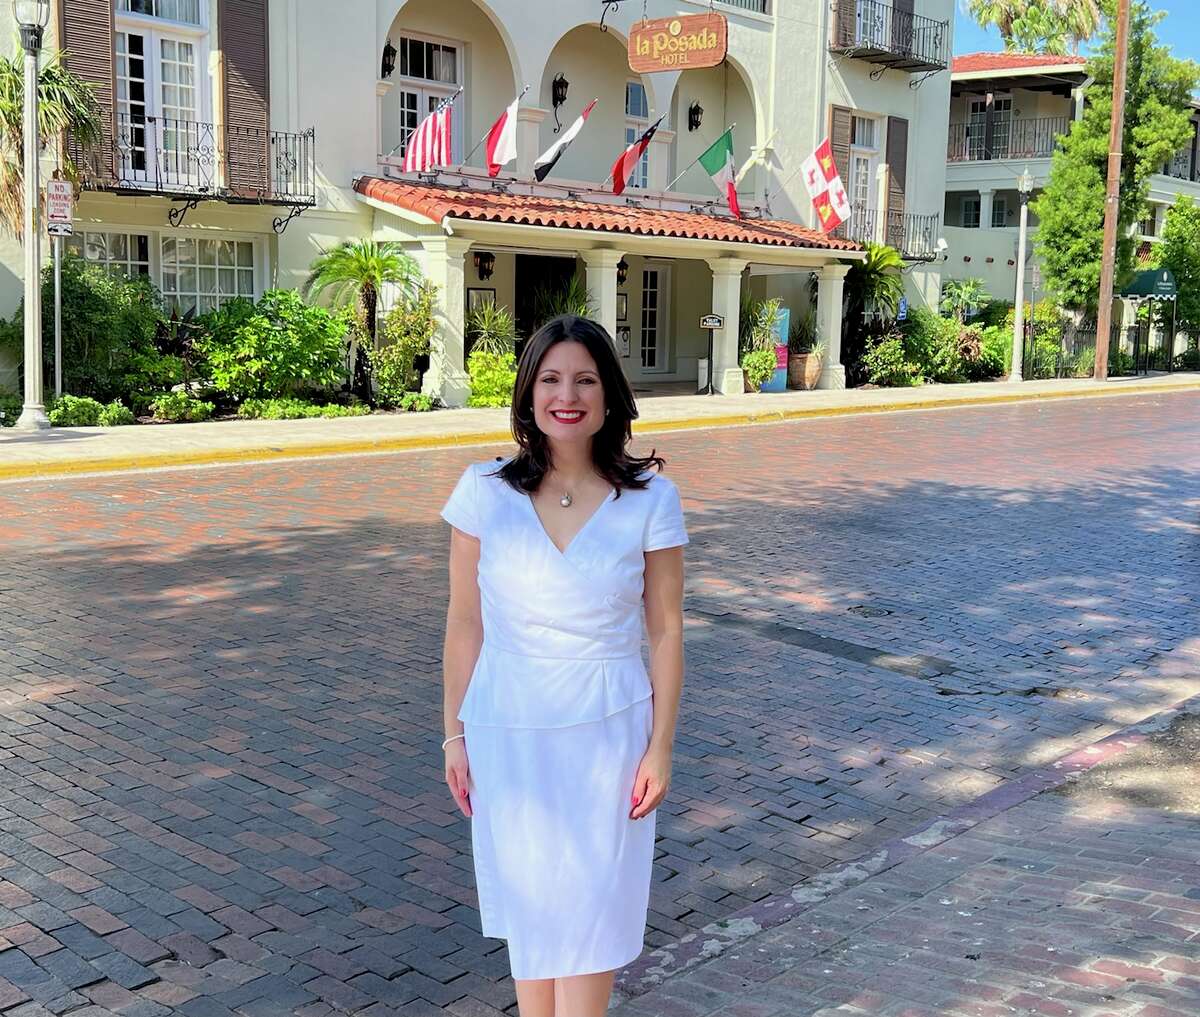 Lesly Mitchell Briones, 41, in front of La Posada Hotel in downtown Laredo. Briones is the new Democratic nominee for Harris County’s Commissioner Commissioner Pct. 4 and the former judge for the Harris County Civil Court at Law #4, visited her hometown of Laredo during this weekend